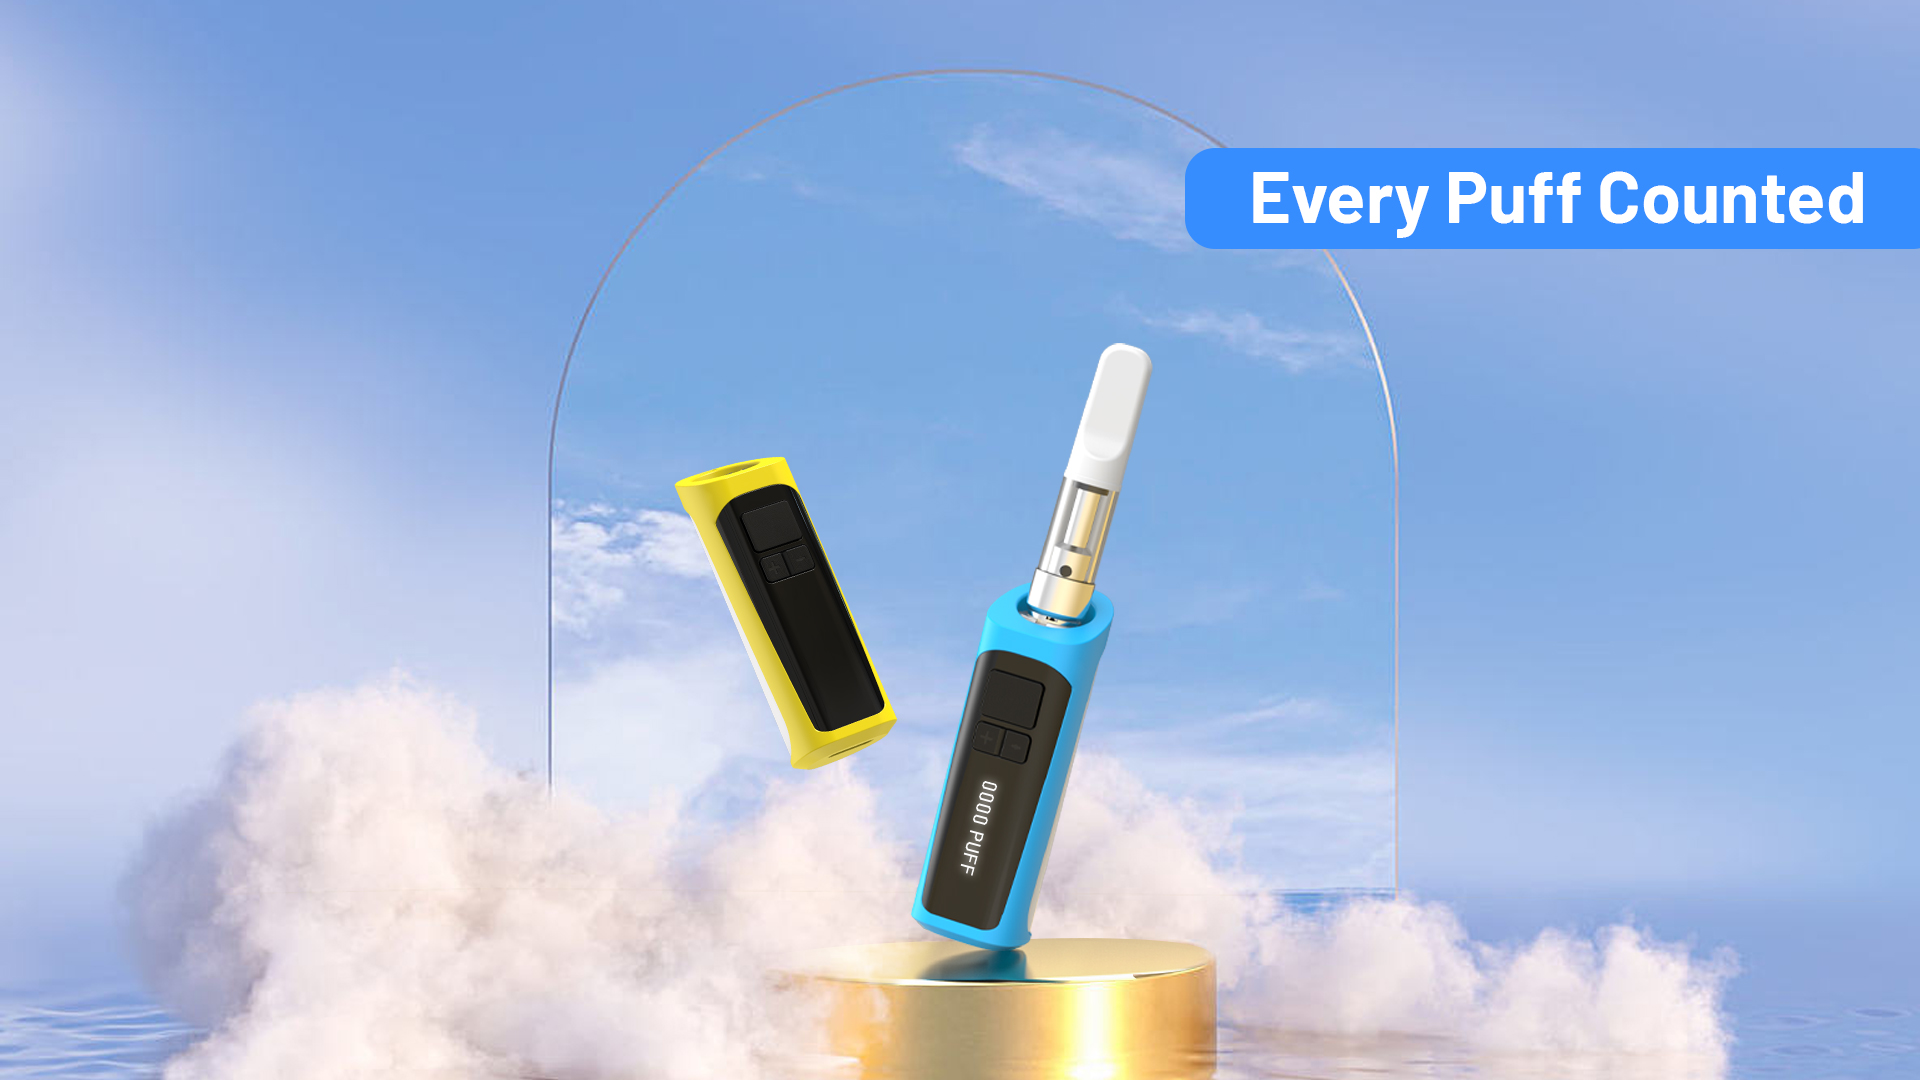 A blue and yellow TIK20 Battery vaporizer with an OLED screen.